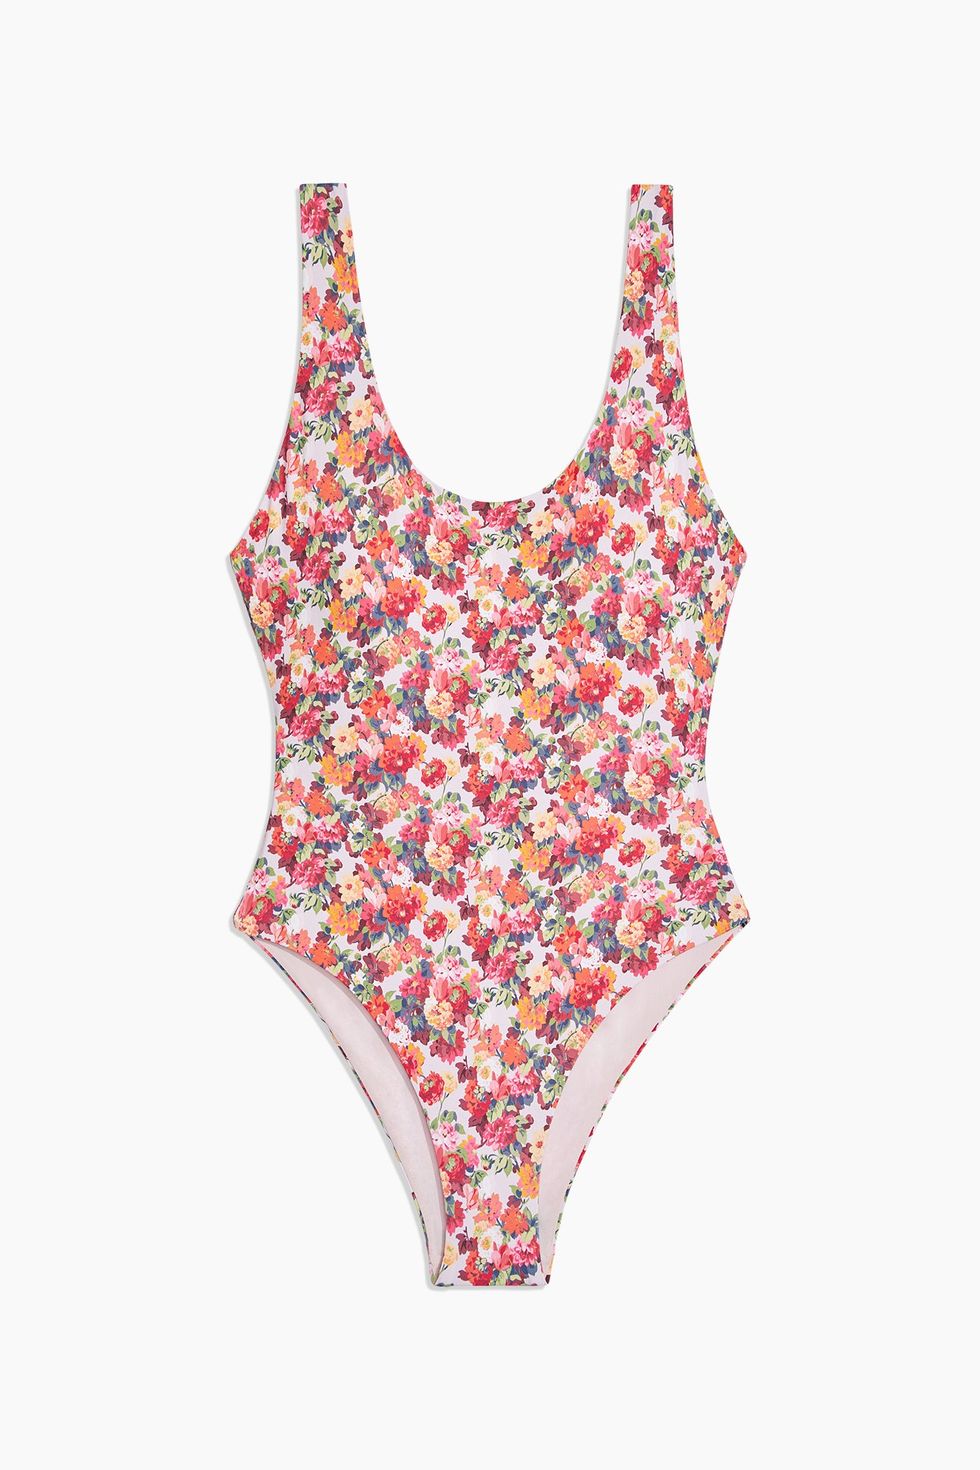 Onia and Liberty London Collaborate on New Swim Collection